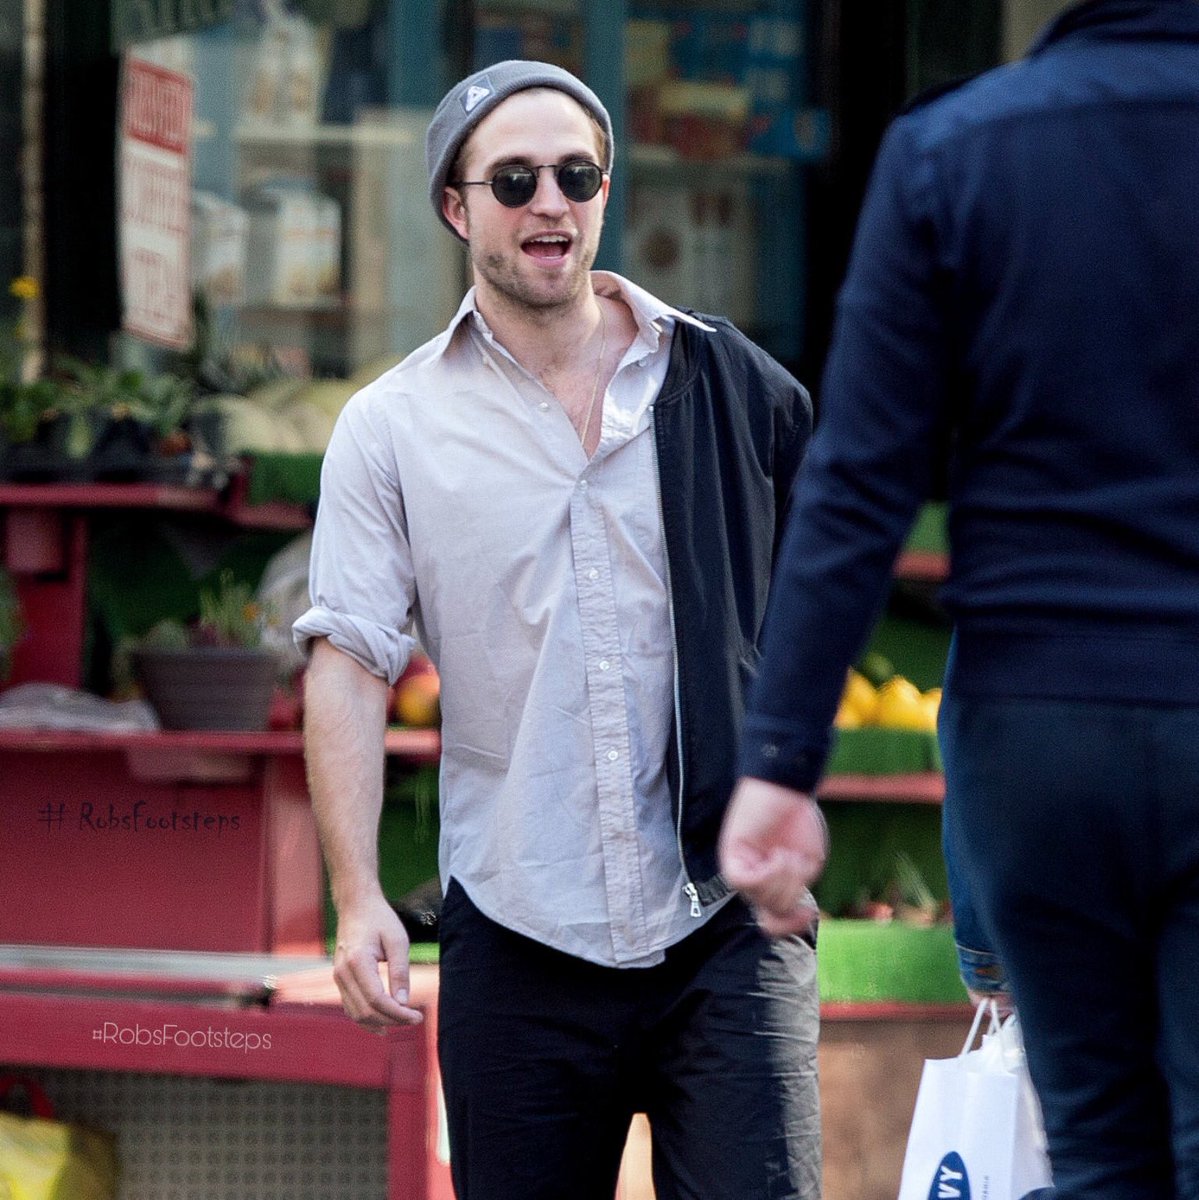 FLASHBACK: On a day like today exactly nine years ago, May 14th 2015, Robert Pattinson was enjoying a fun day in New York City, USA, in the company of his good friend Jamie Strachan. #throwback